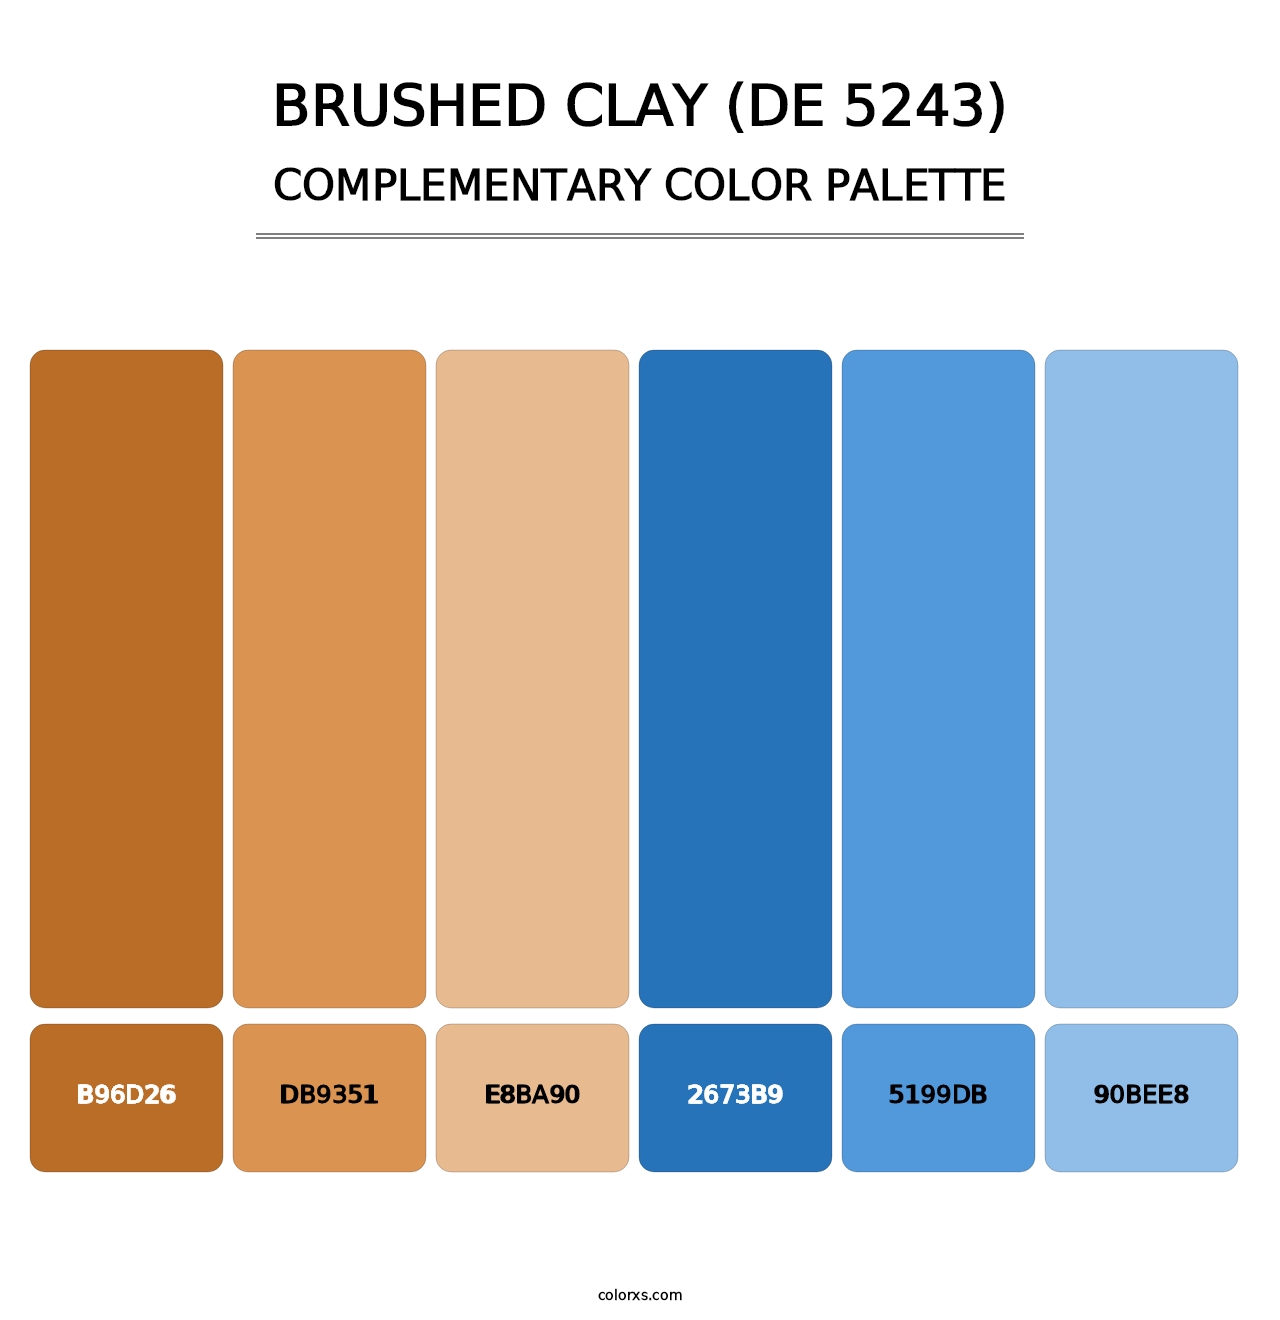 Brushed Clay (DE 5243) - Complementary Color Palette